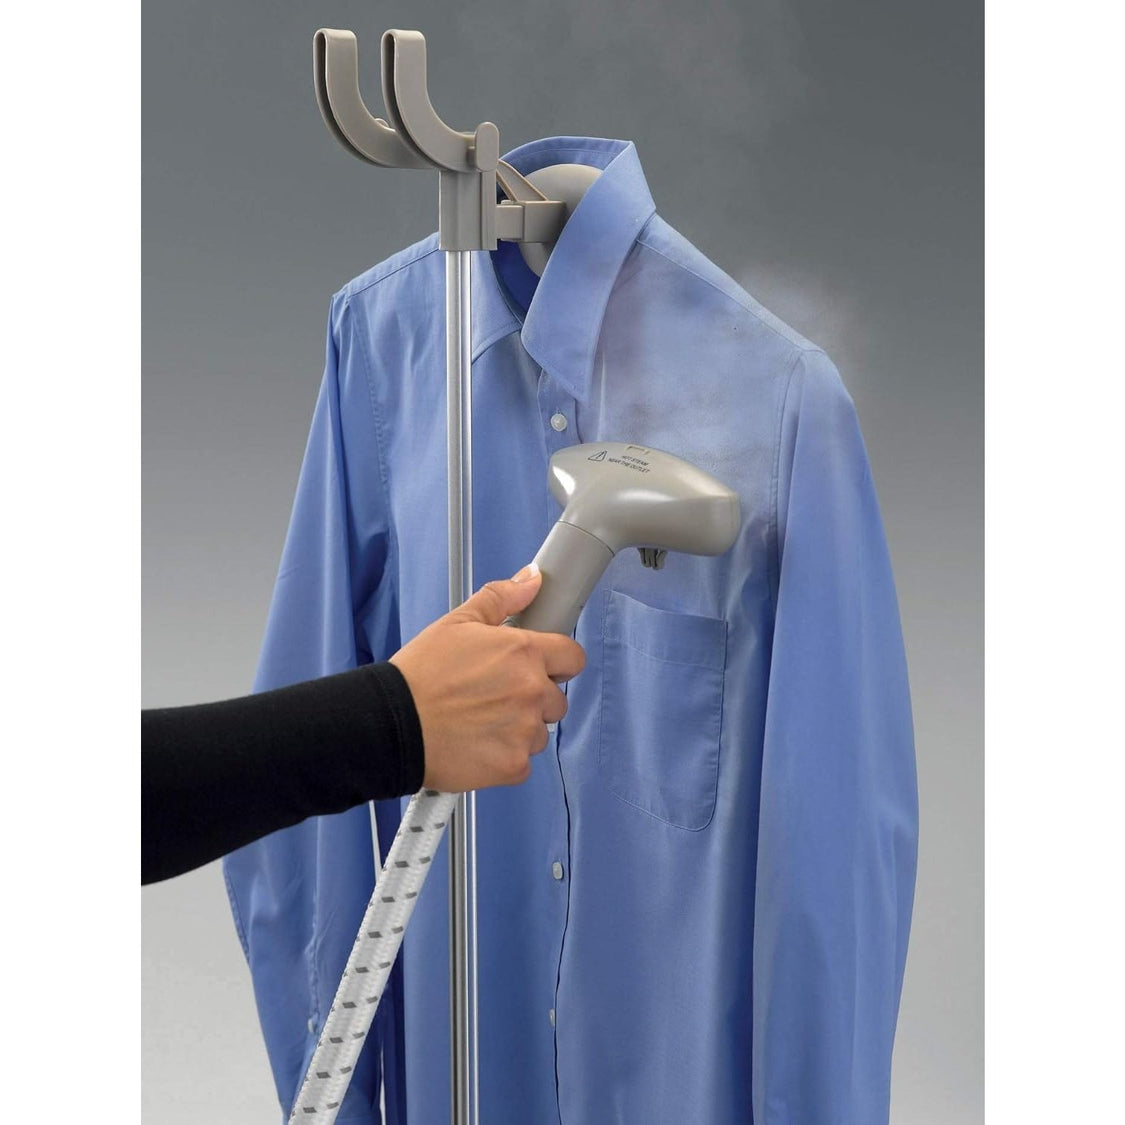 Kenwood Garment and Fabric Steamer 1500W - GSP65 | Supply Master Accra, Ghana Electric Iron Buy Tools hardware Building materials